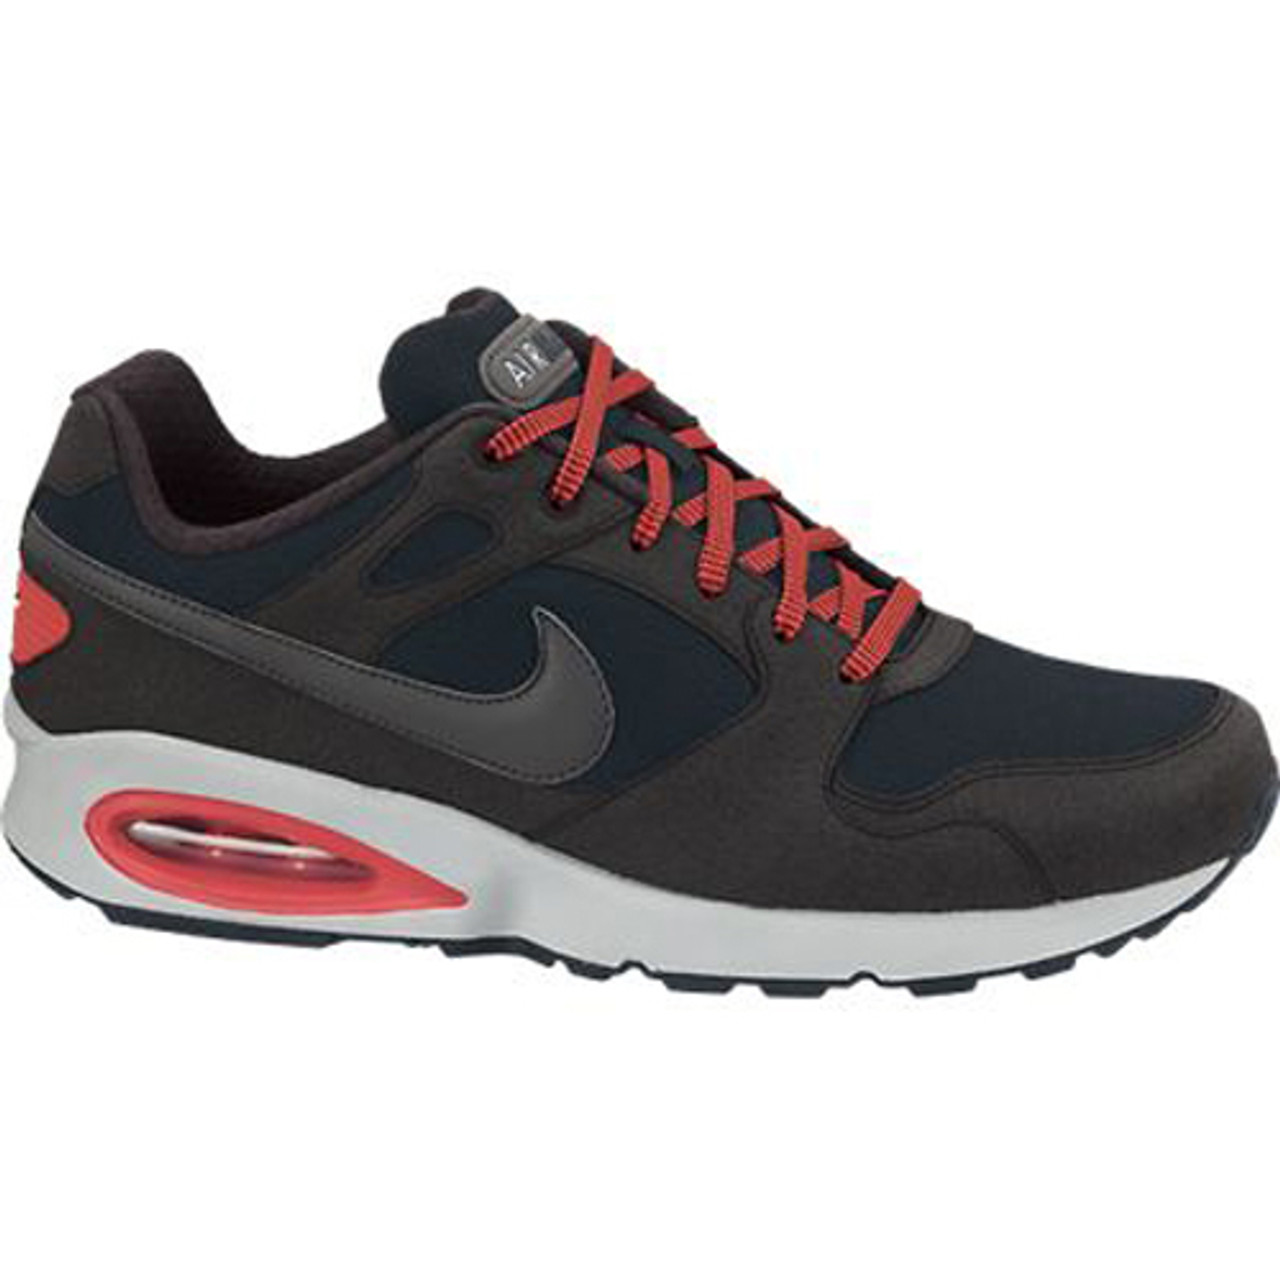 New Nike Air Coliseum Racer Leather Mens Running Shoes - Black/Challenge Red/Anthracite/Dark Grey | Discount Nike Athletic & More - Shoolu.com | Shoolu.com